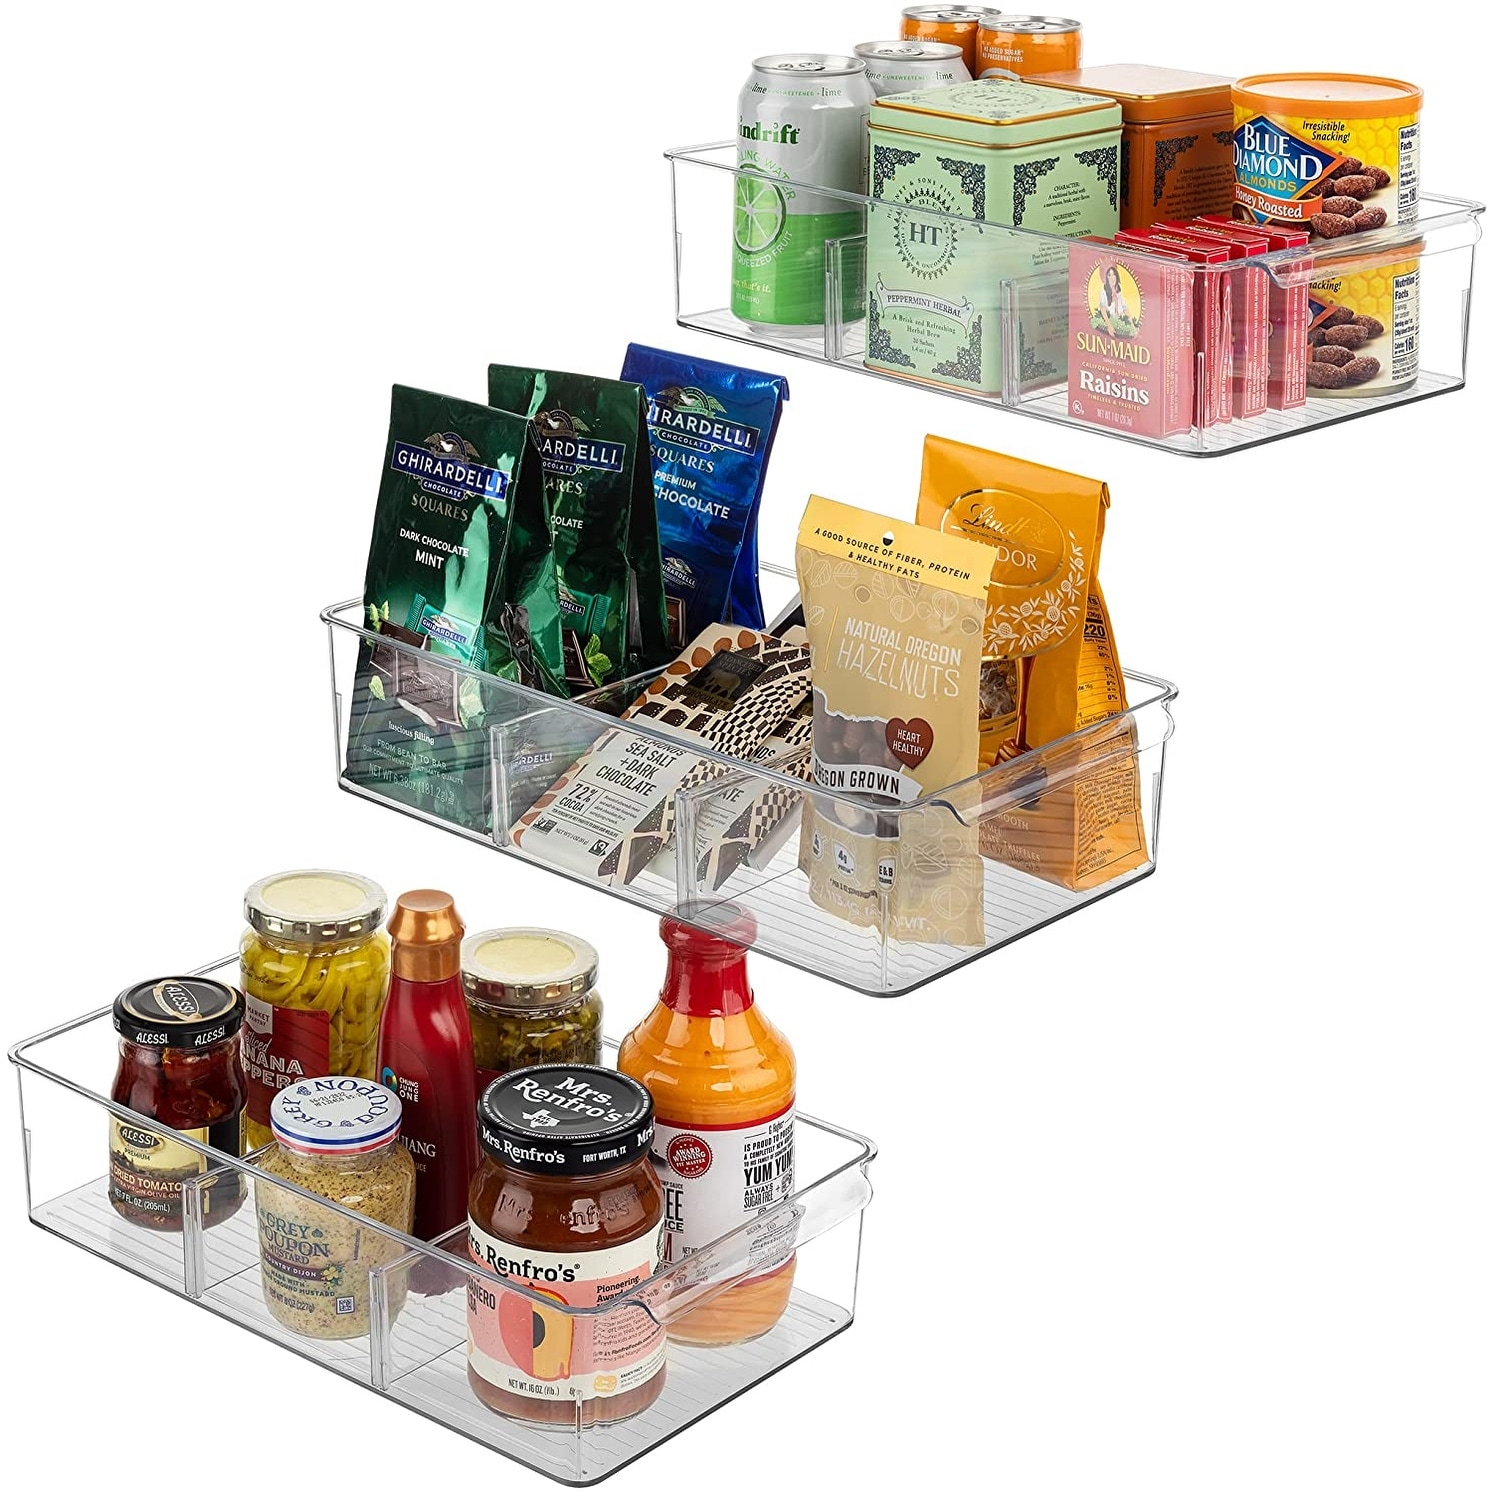 https://ak1.ostkcdn.com/images/products/is/images/direct/5677a3bf50f183e389a5925fcfac85b7b9d4b737/Organizer-Bins%2C-Removable-Compartments%2C-Cabinet-Organizers-%283-Pack%29.jpg